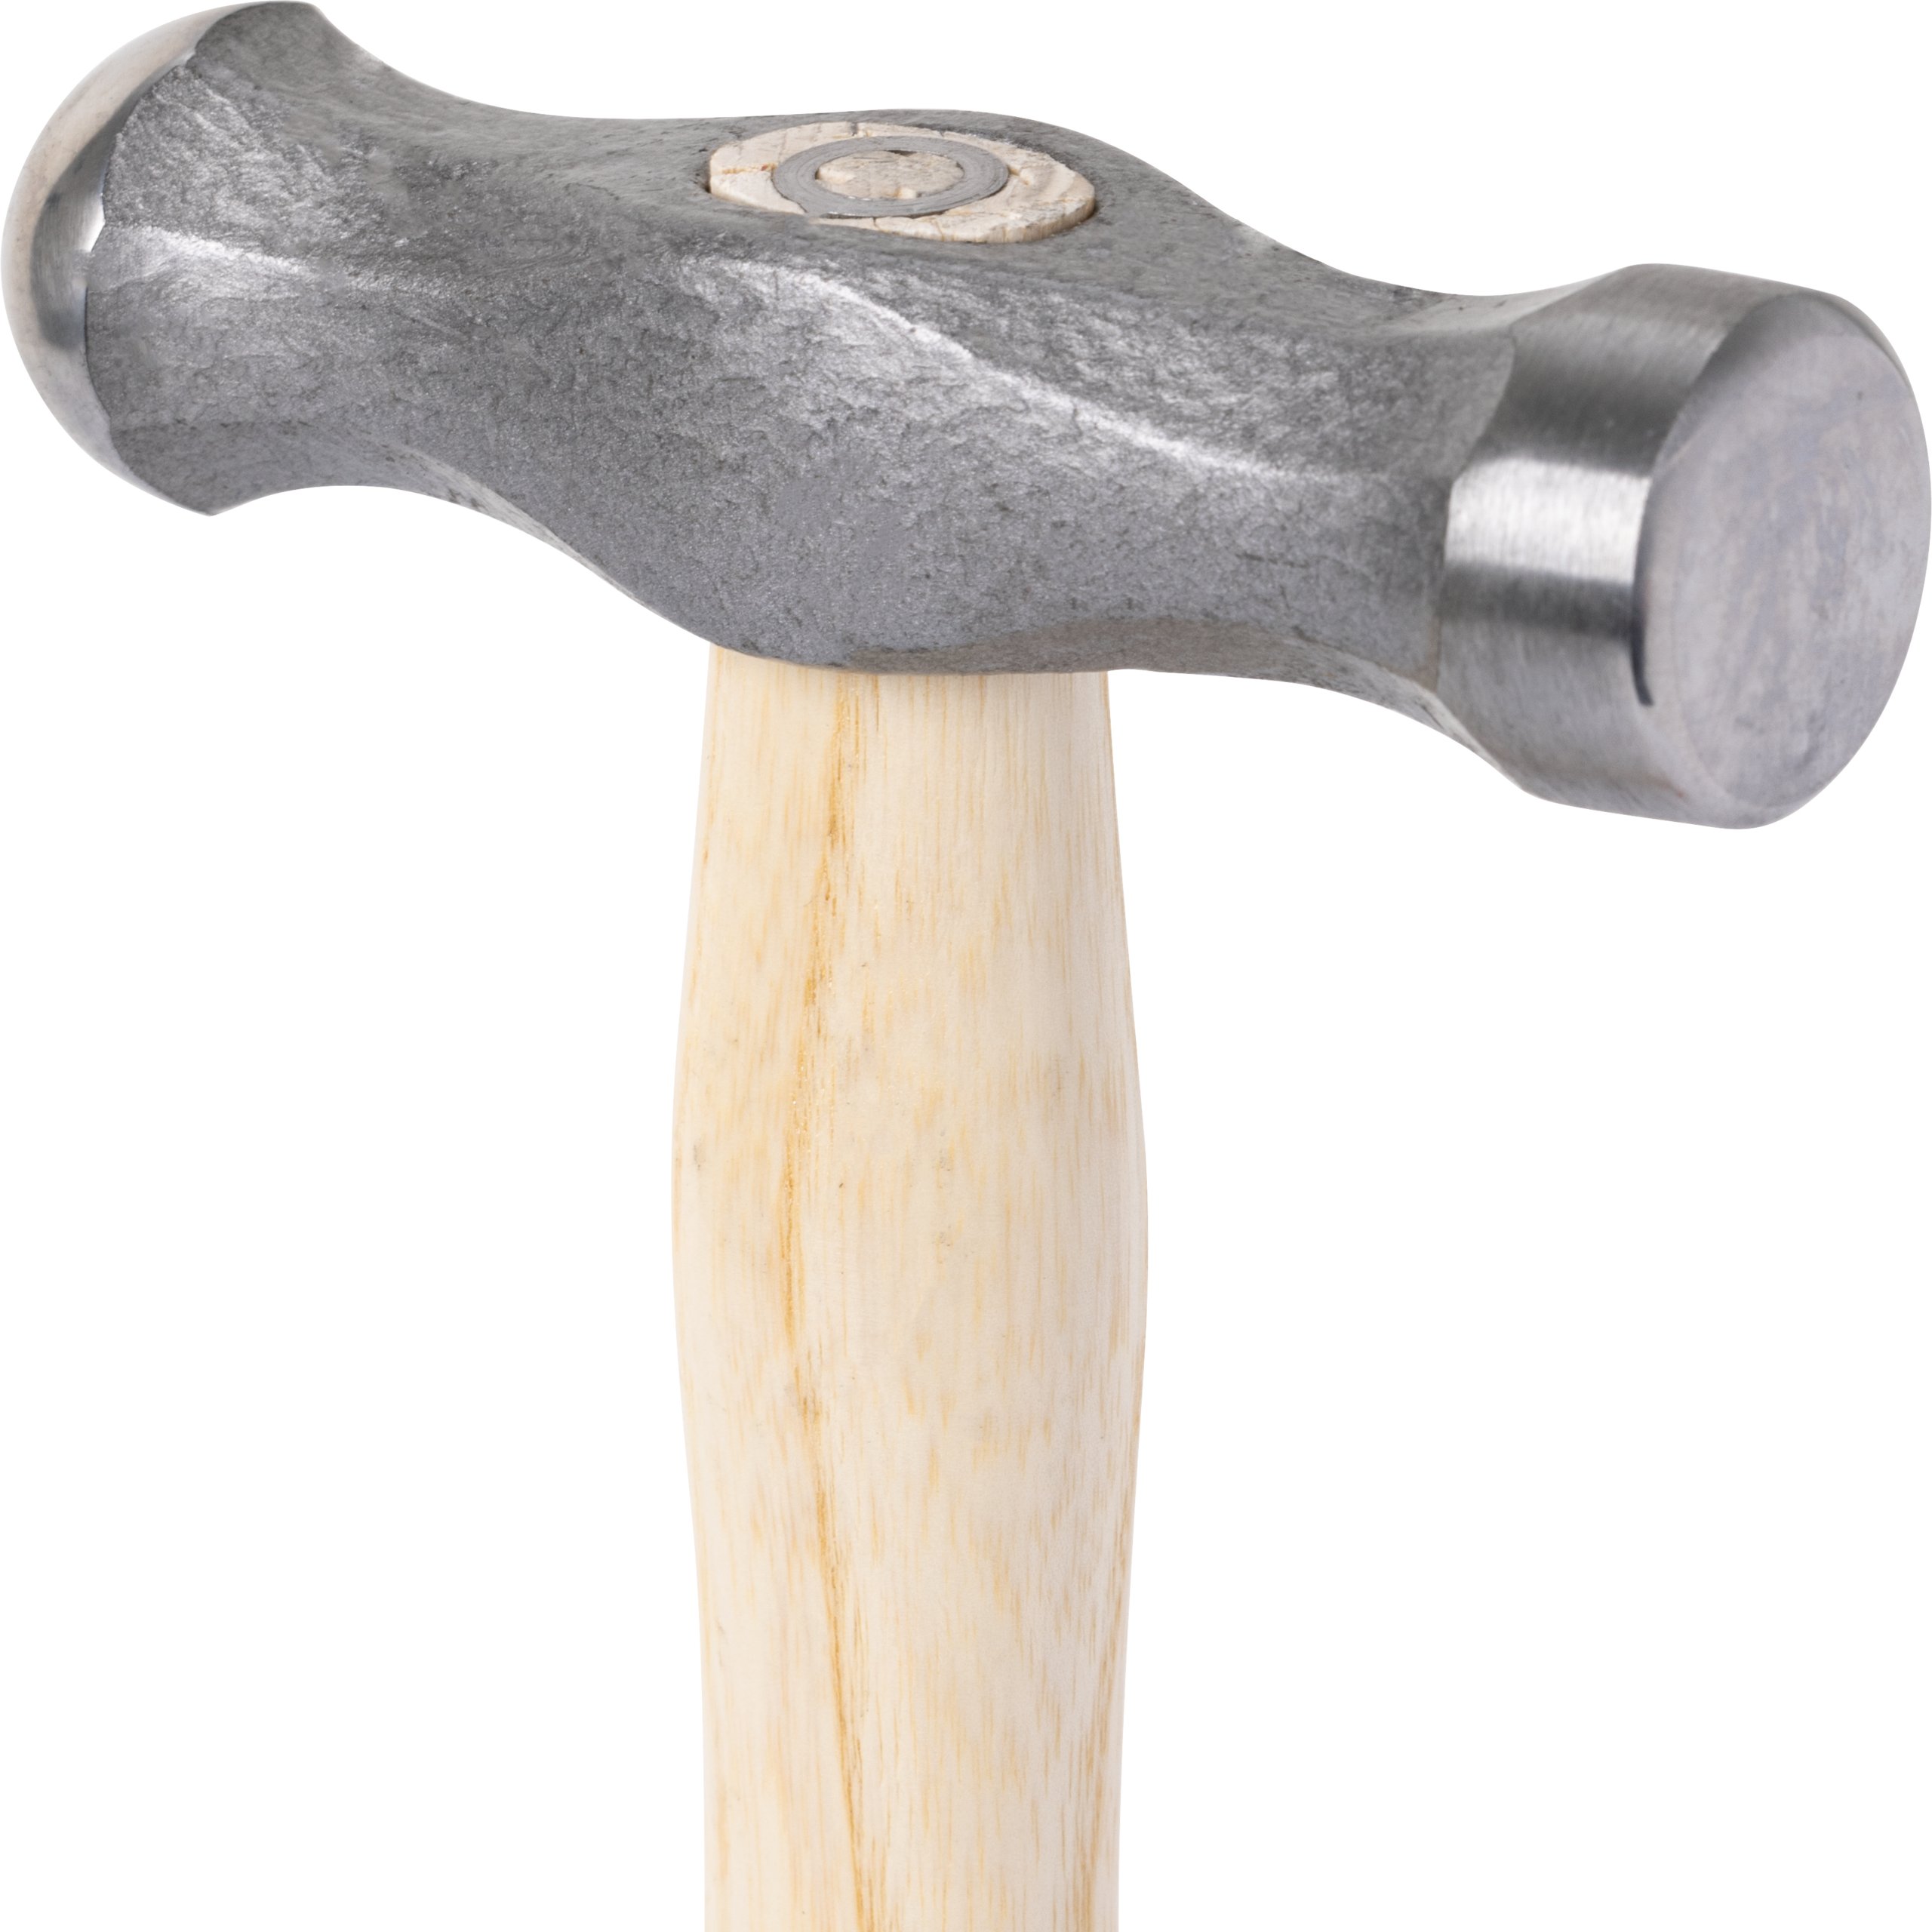 Planishing Hammer – A to Z Jewelry Tools & Supplies